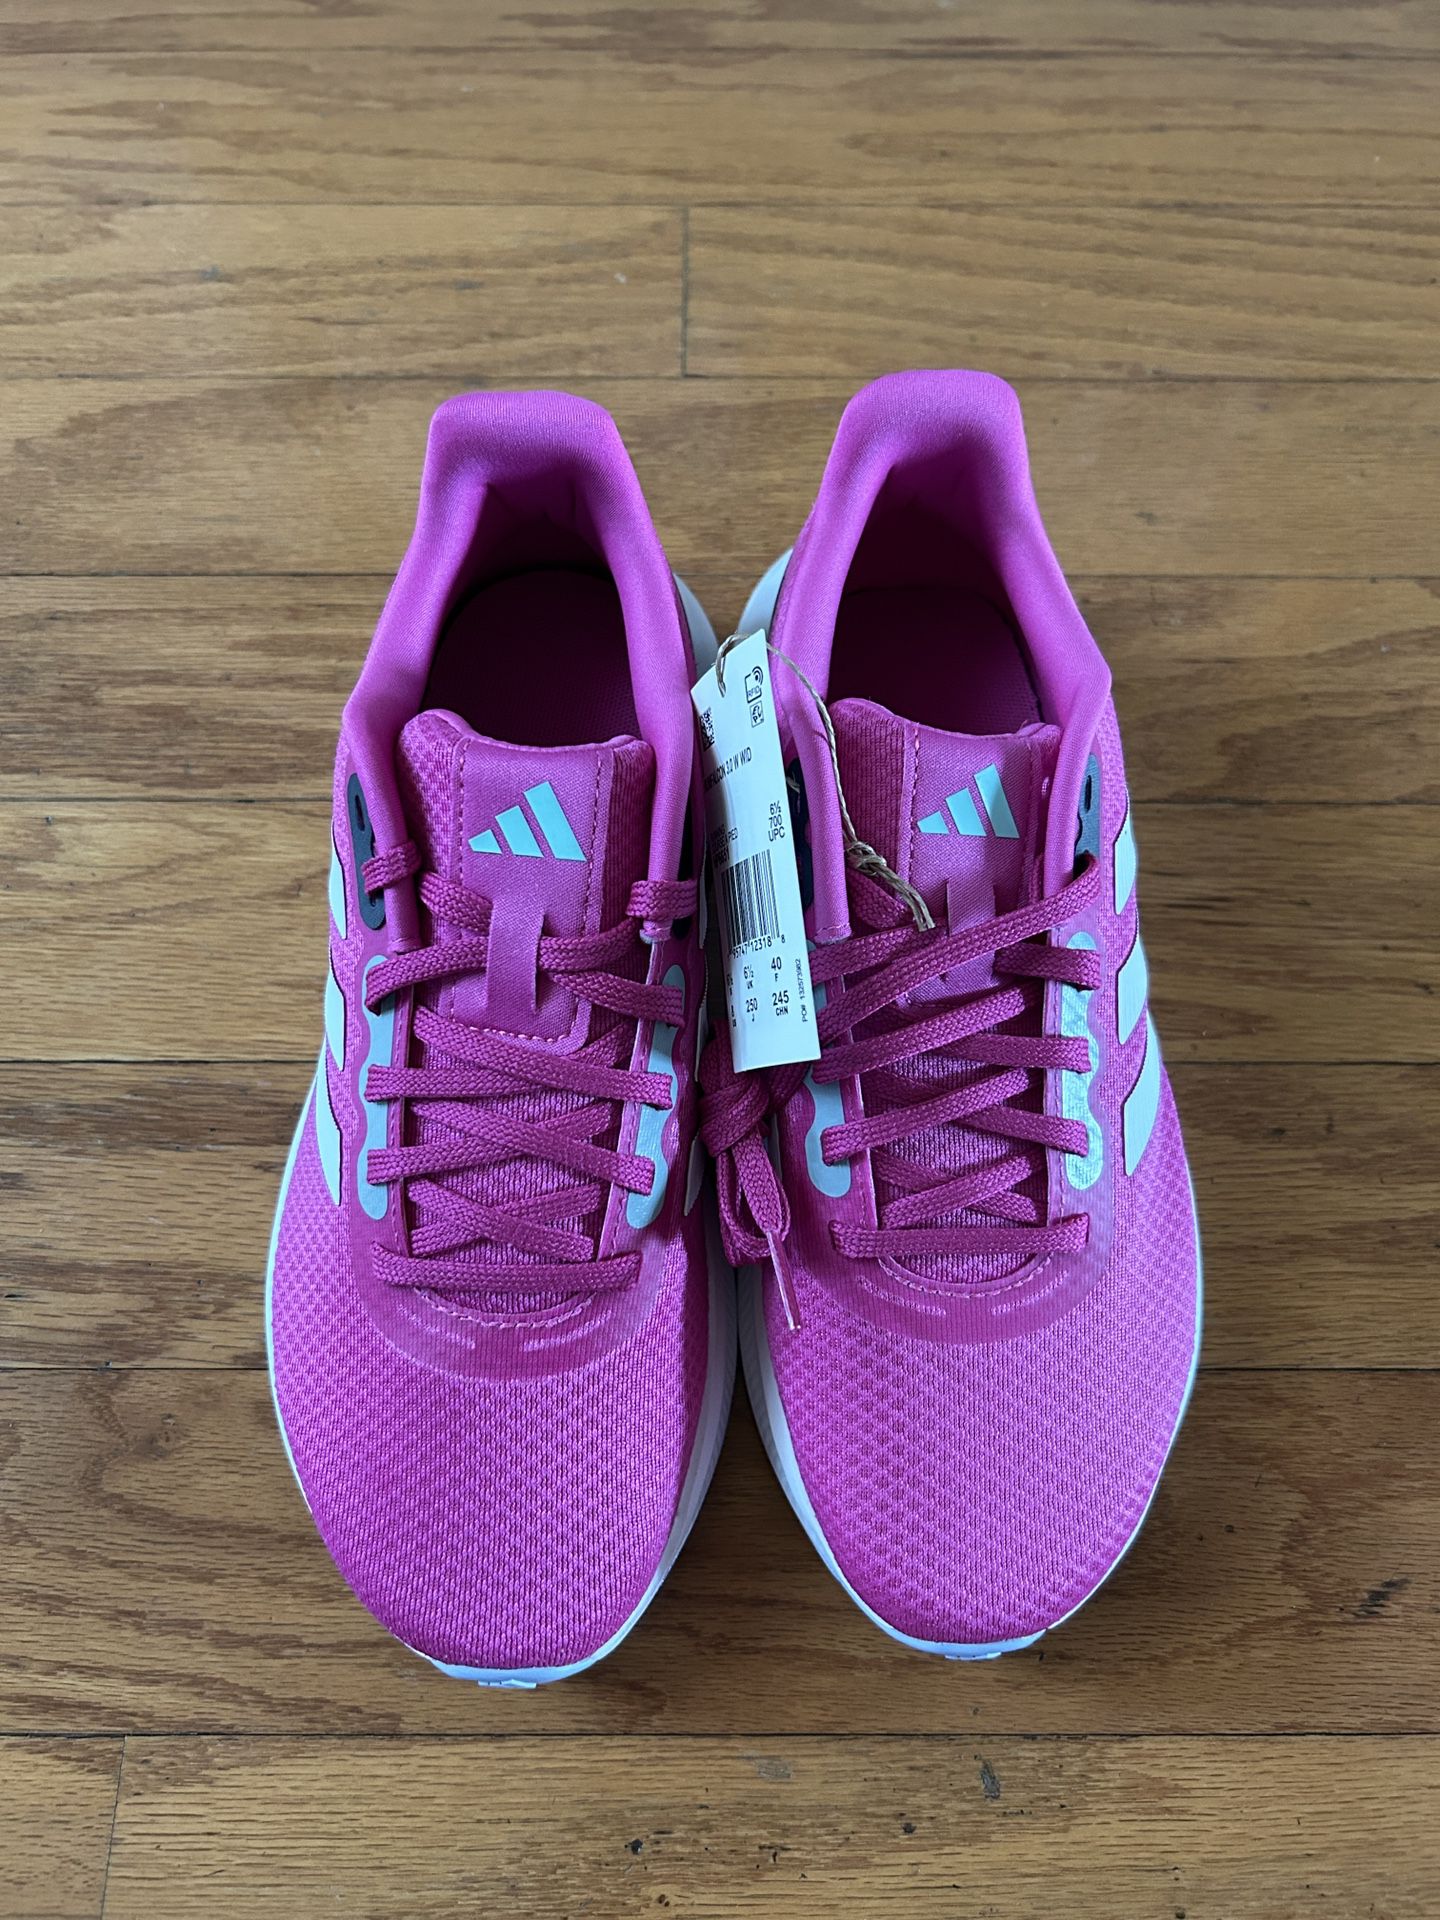 NWT Adidas women running shoes size 8